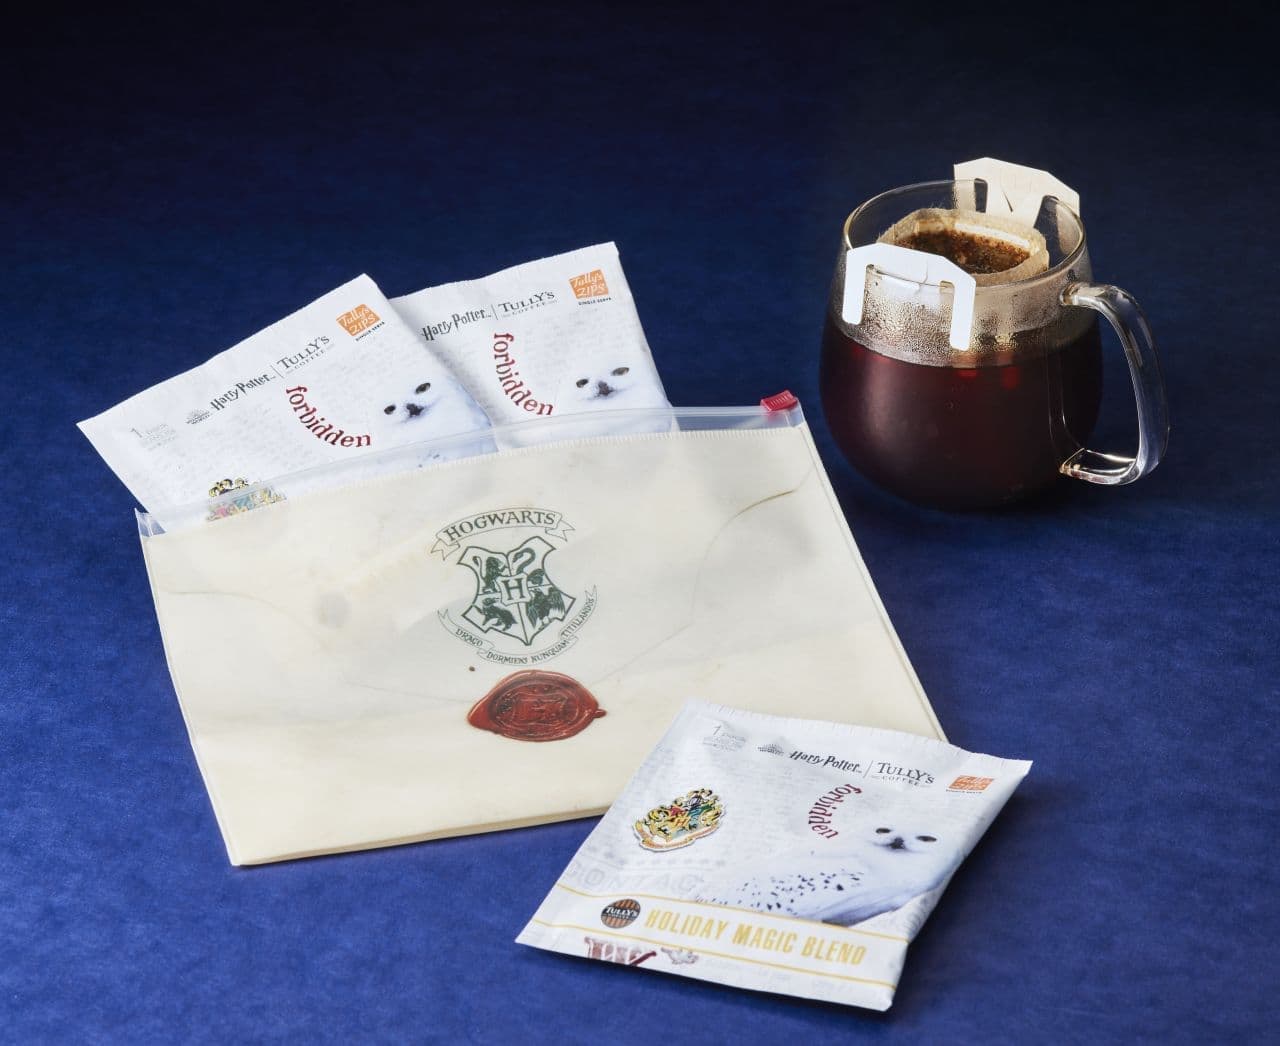 Tully's Coffee "Harry Potter" collaboration goods